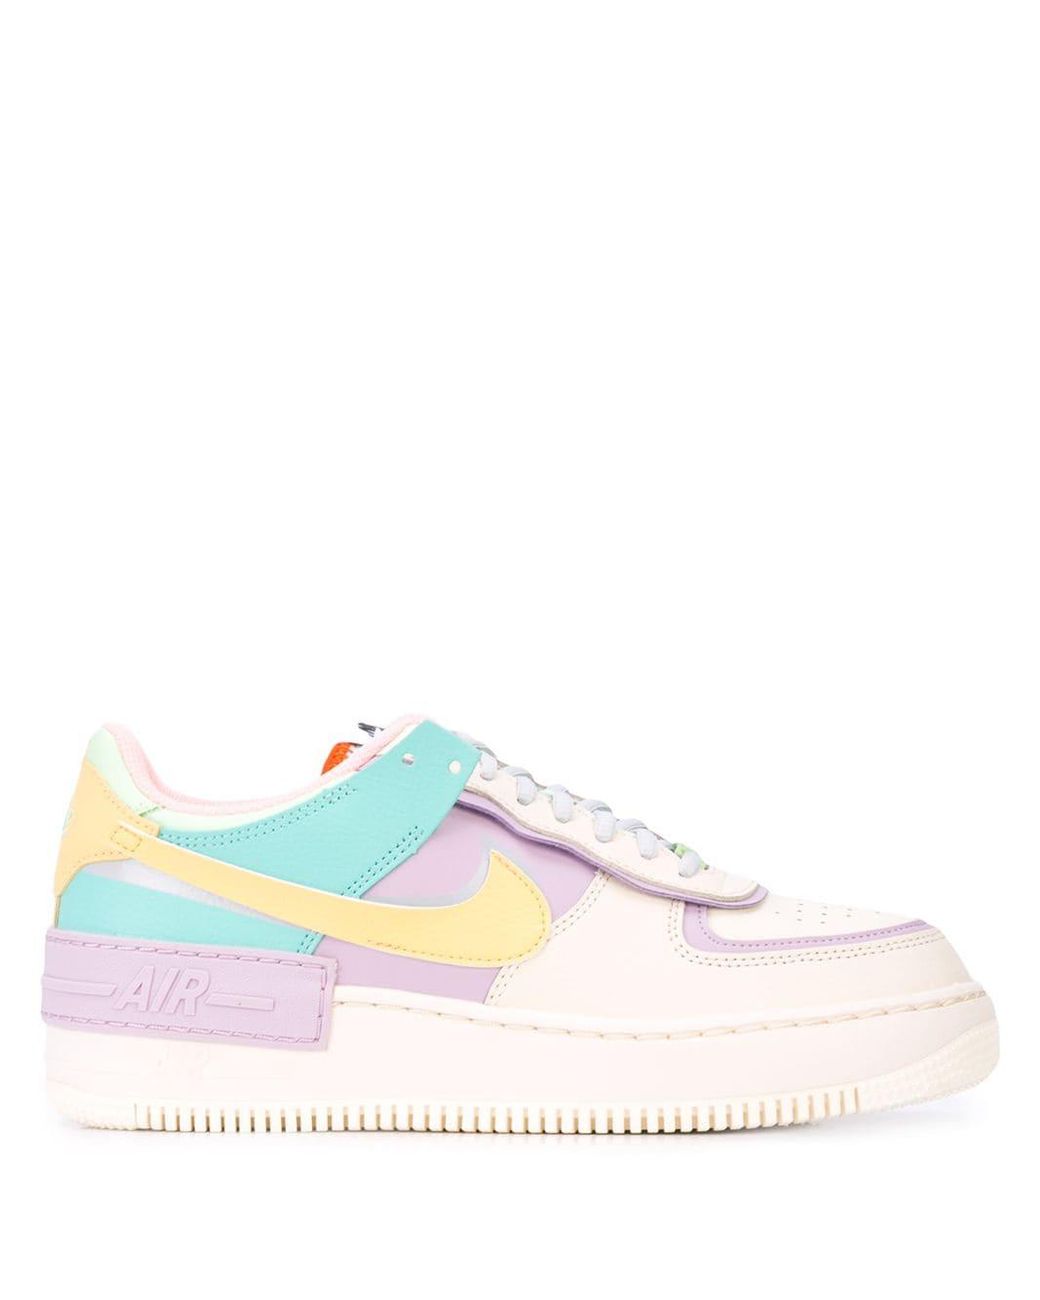 Nike Af1 Shadow pale Ivory/pastel Multicolor Sneakers in White